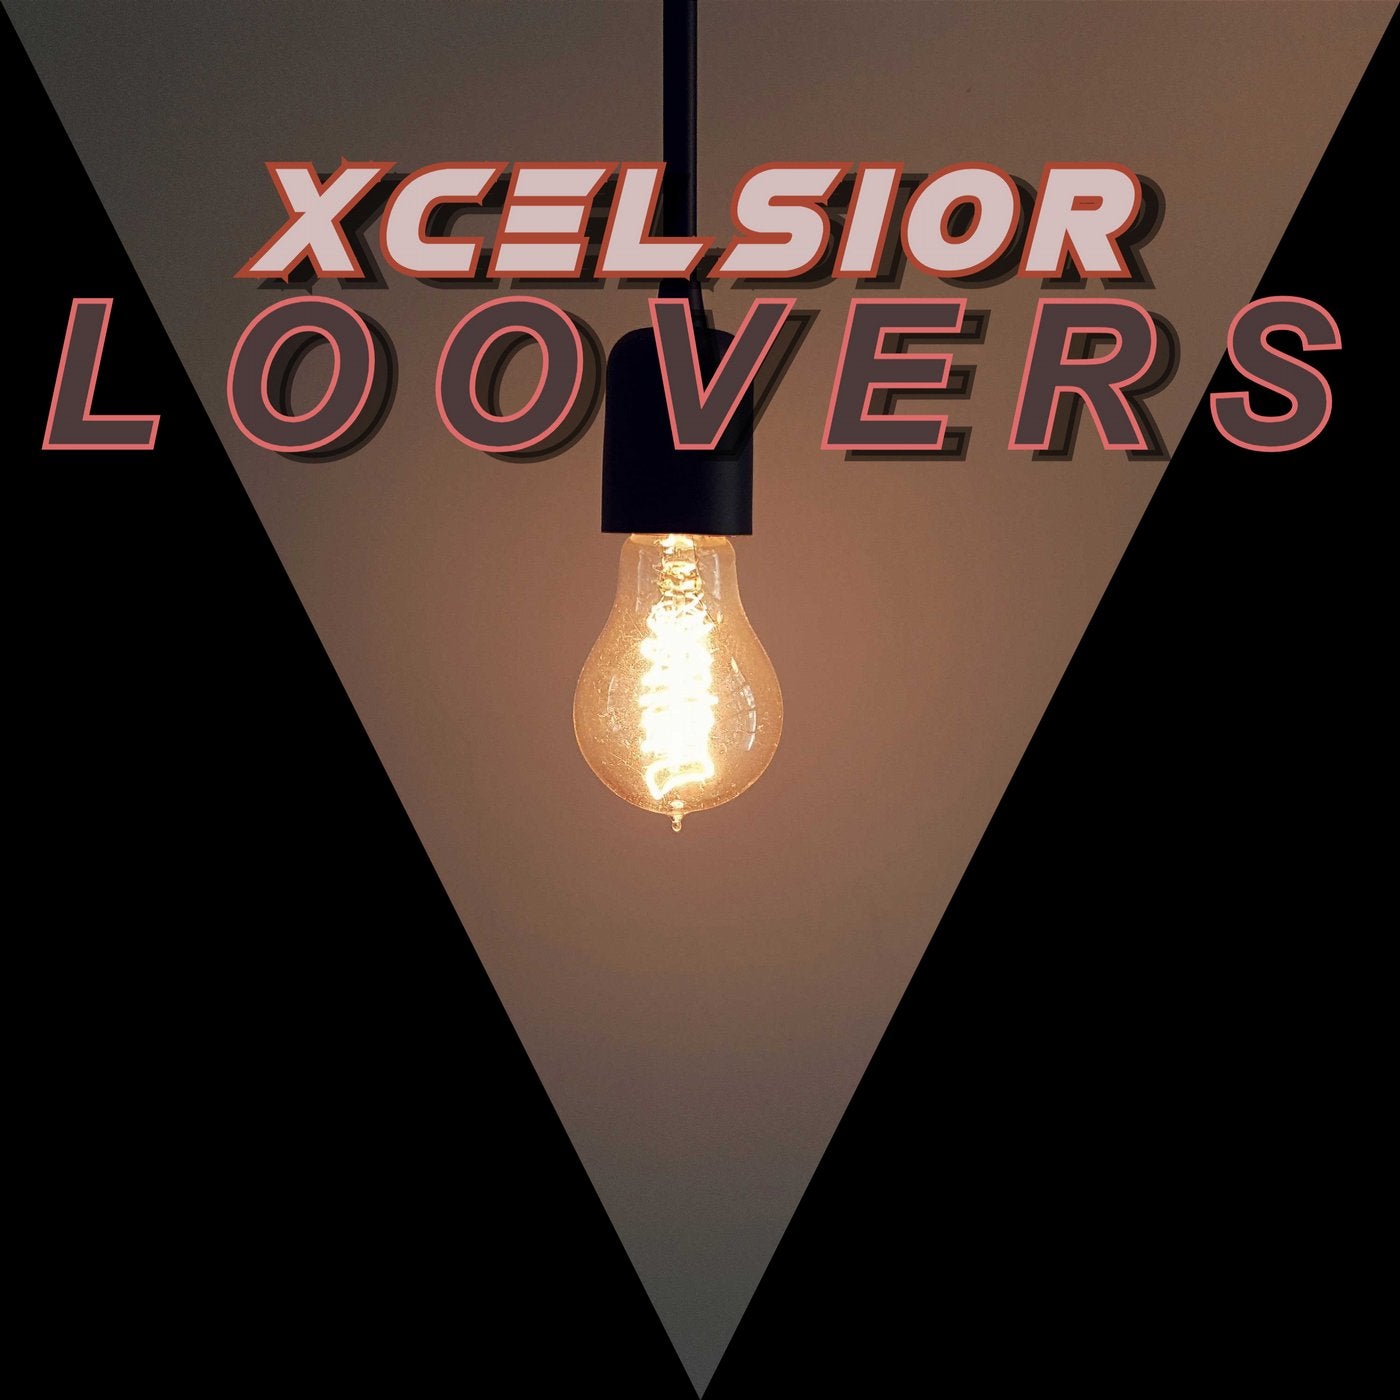 Loovers